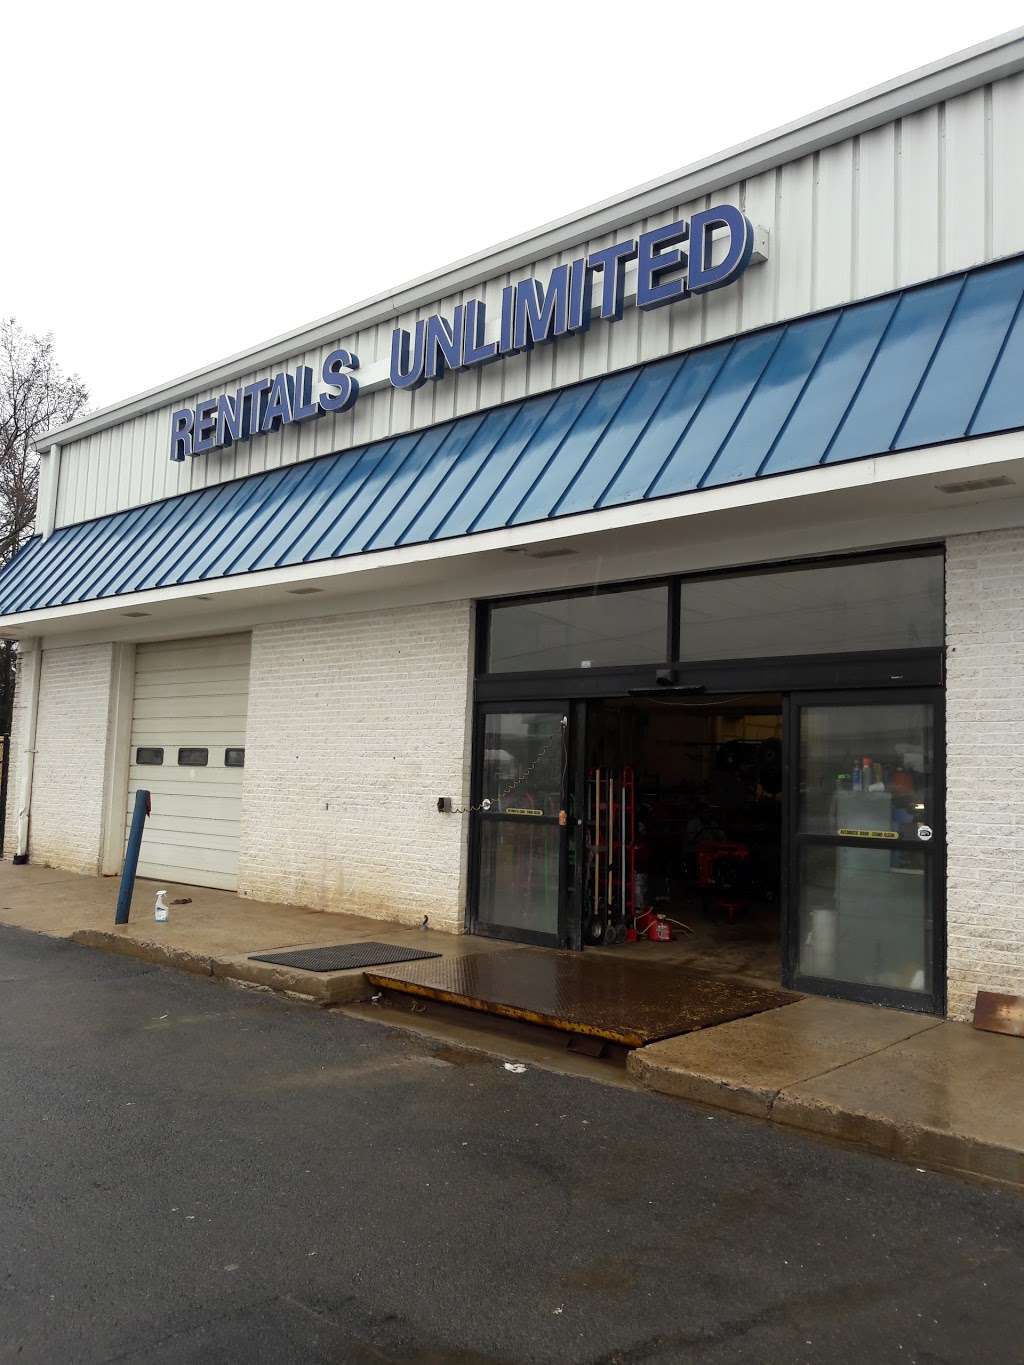 Rentals Unlimited Inc | 44783 Old Ox Rd, Sterling, VA 20166, USA | Phone: (703) 709-9300